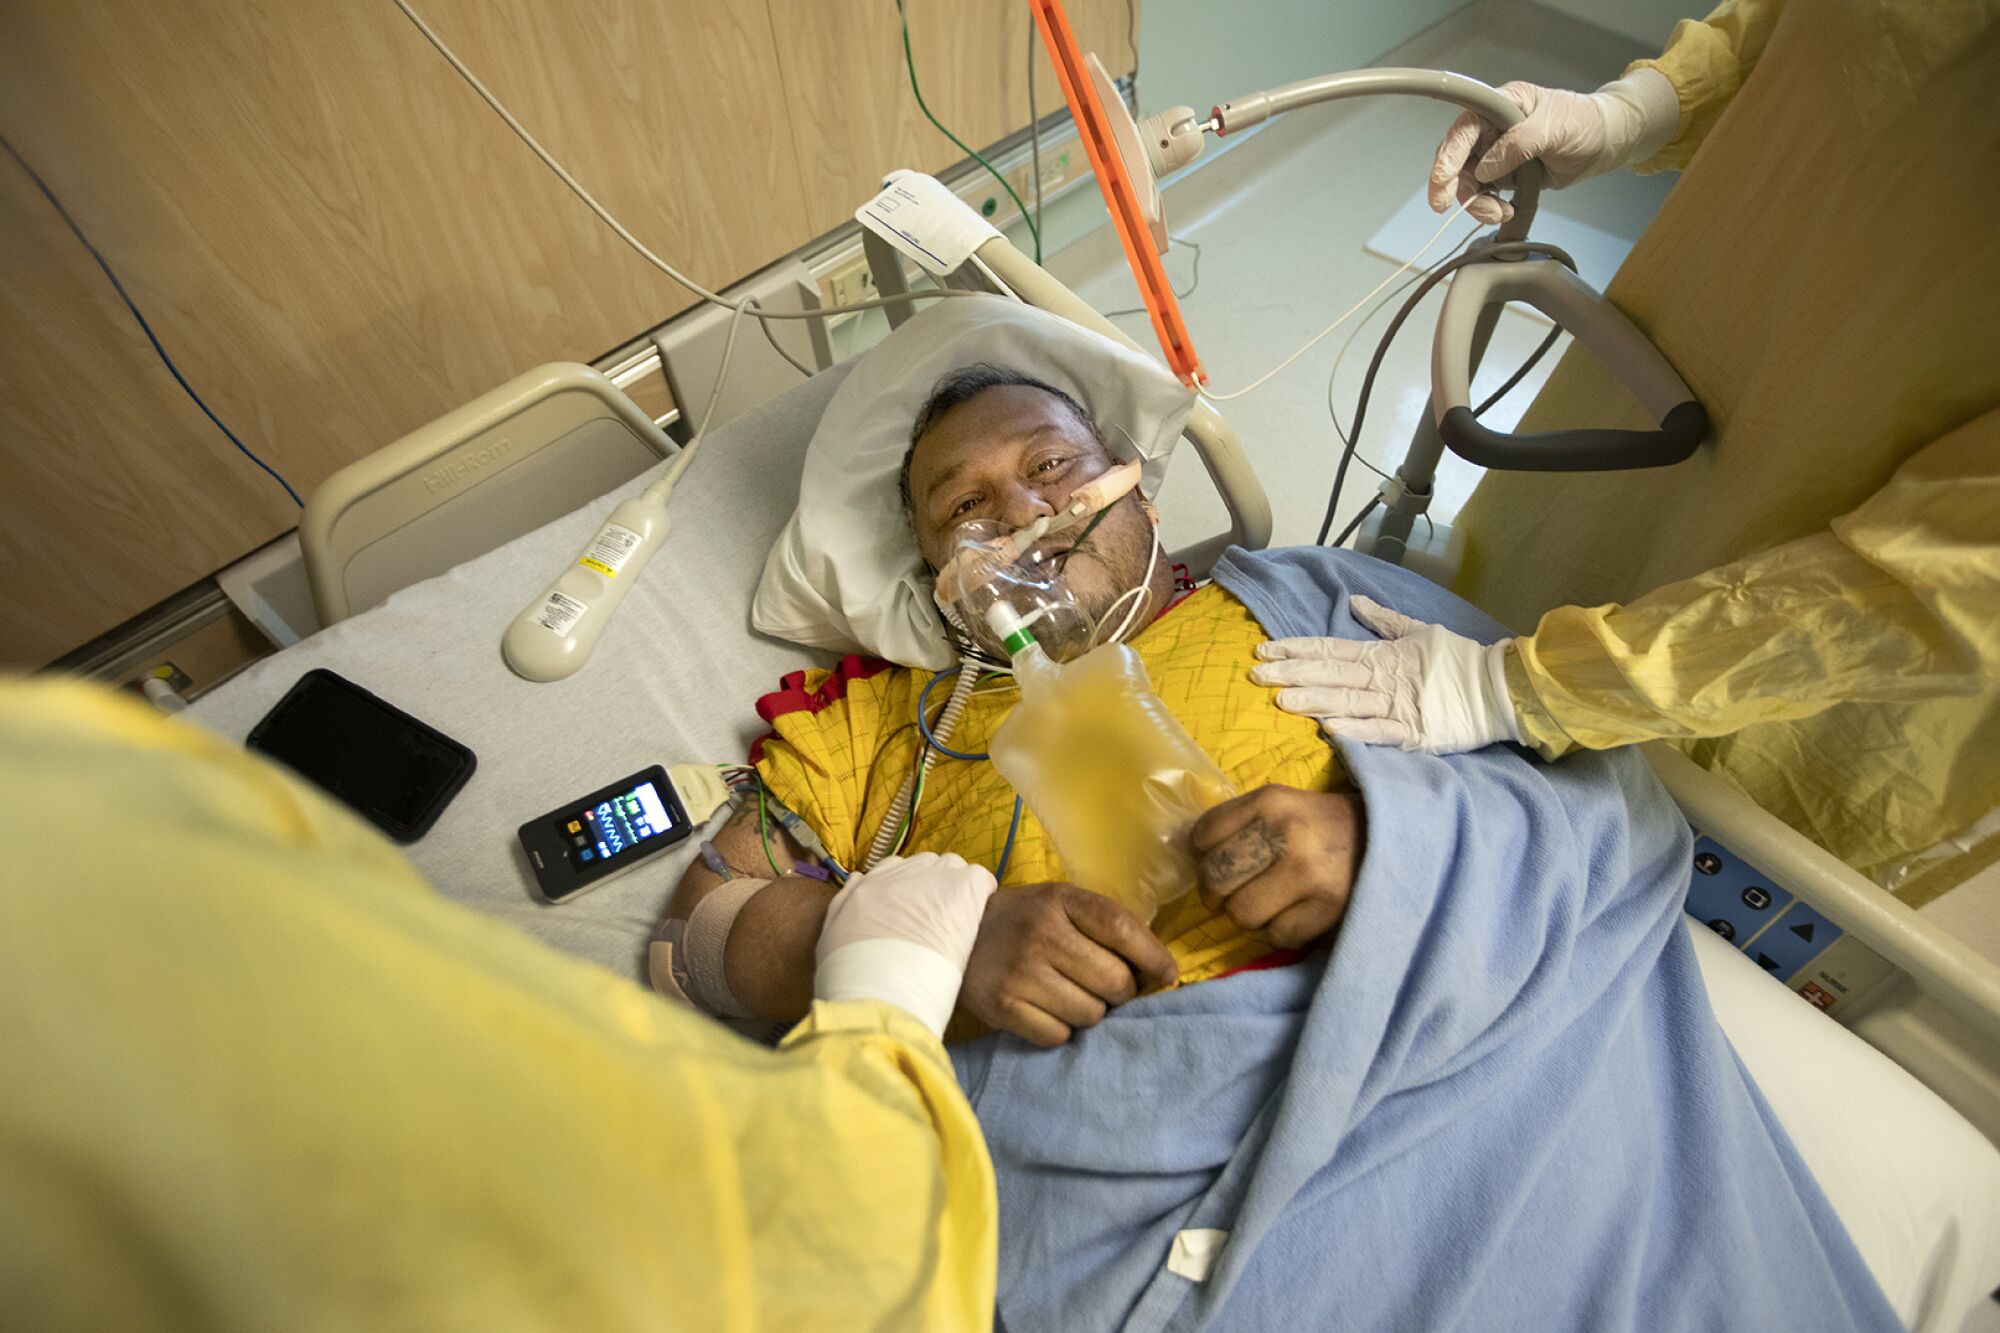 Feb. 1: Dr. Ameer Moussa comforts COVID-19 patient Mariano Zuniga Anaya, who holds an air bag and has tubes under his nose